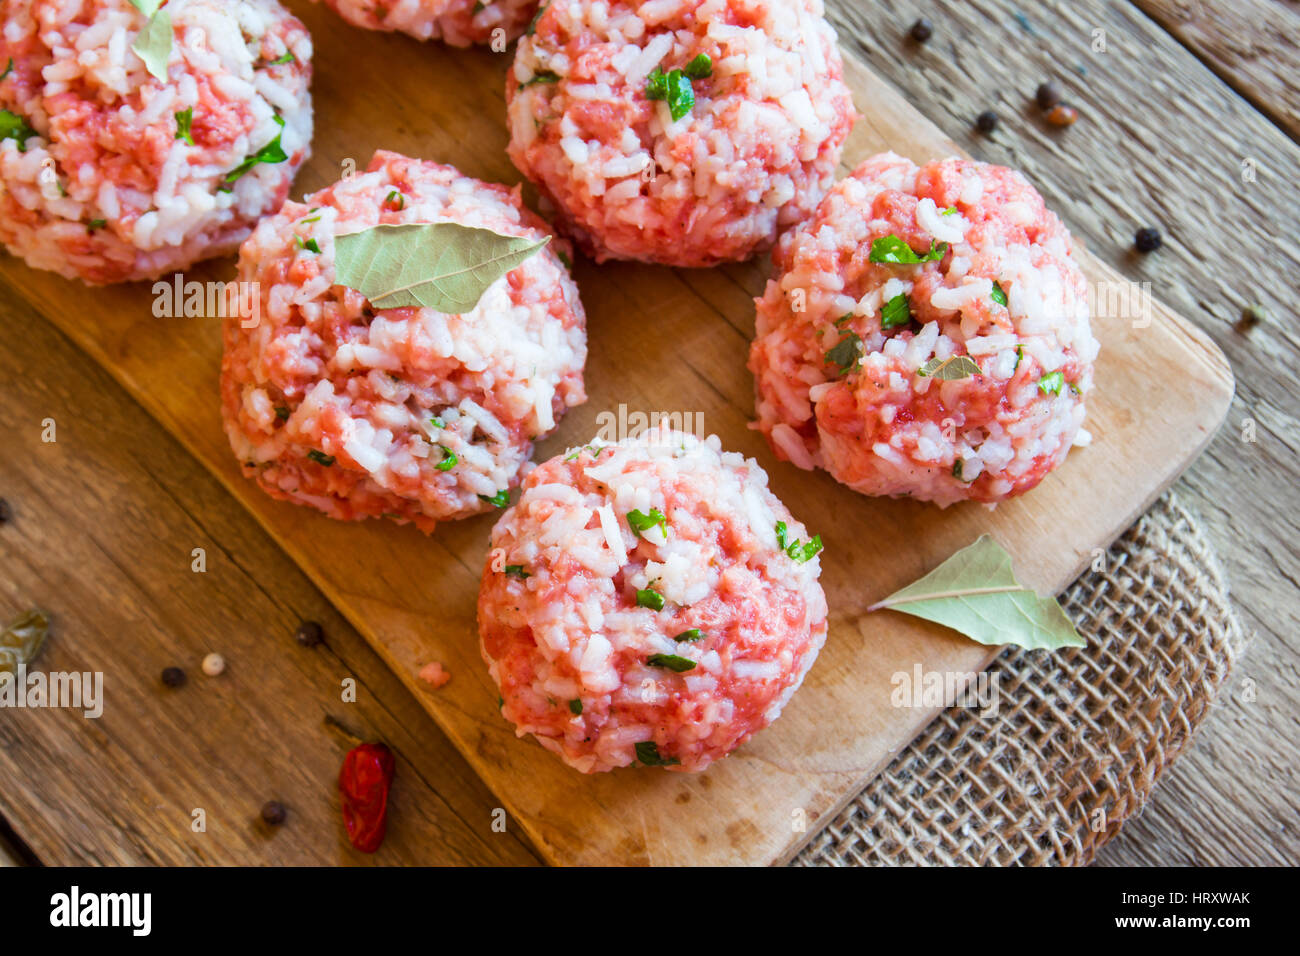 Cooking meatballs with vegetables, rice and spices on wooden cutting board close up Stock Photo